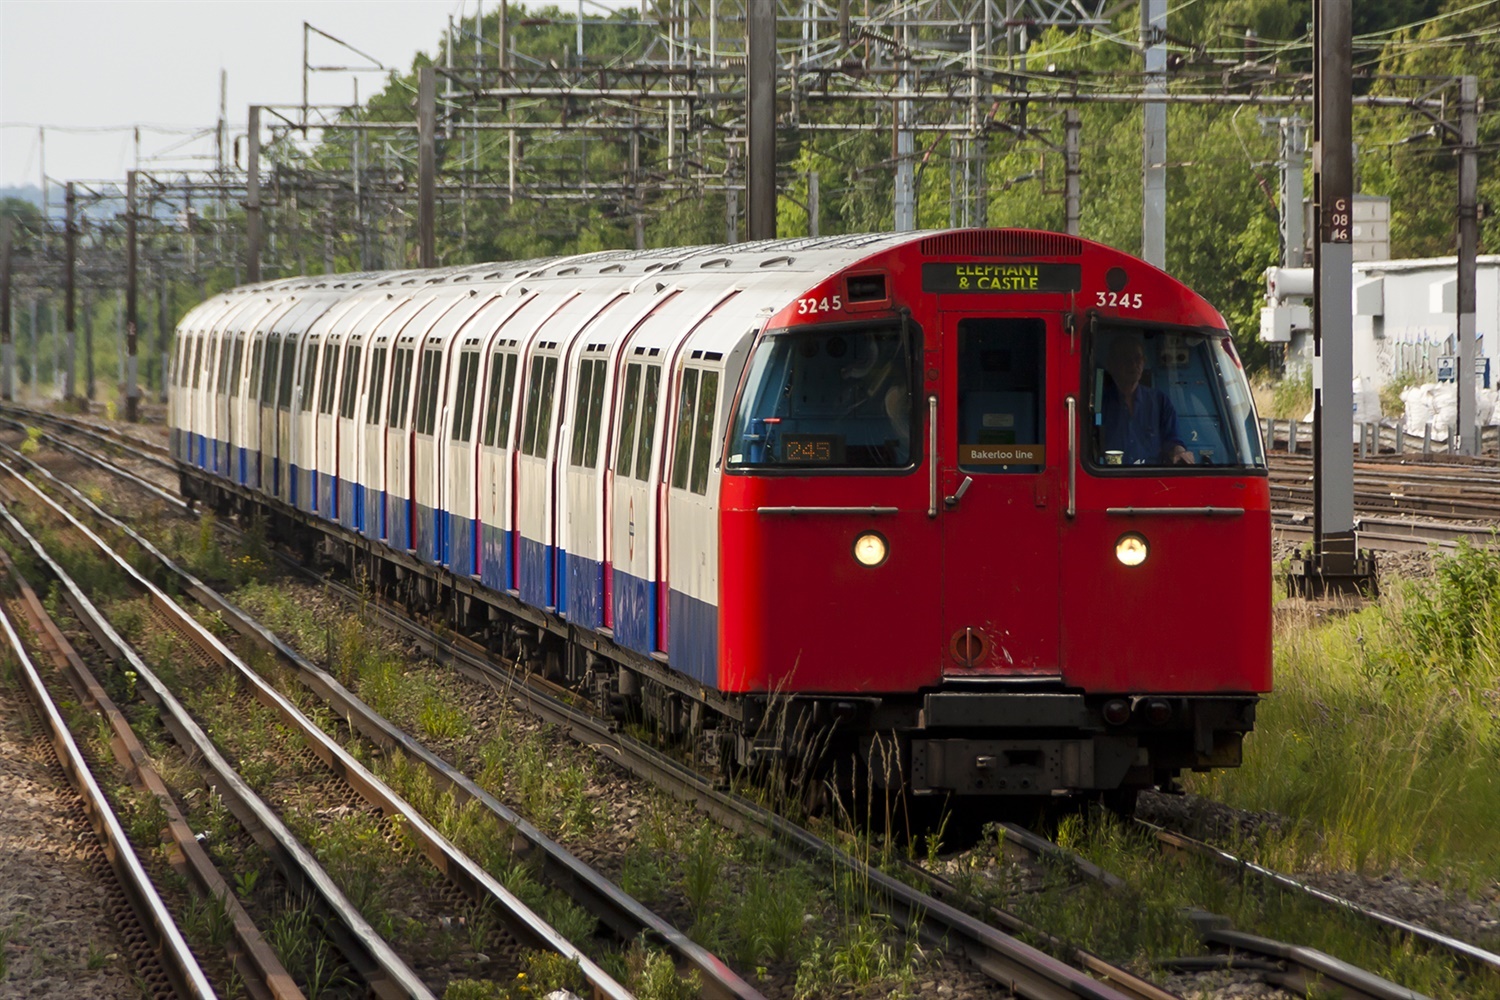 Public back latest proposed plans for Bakerloo Line extension